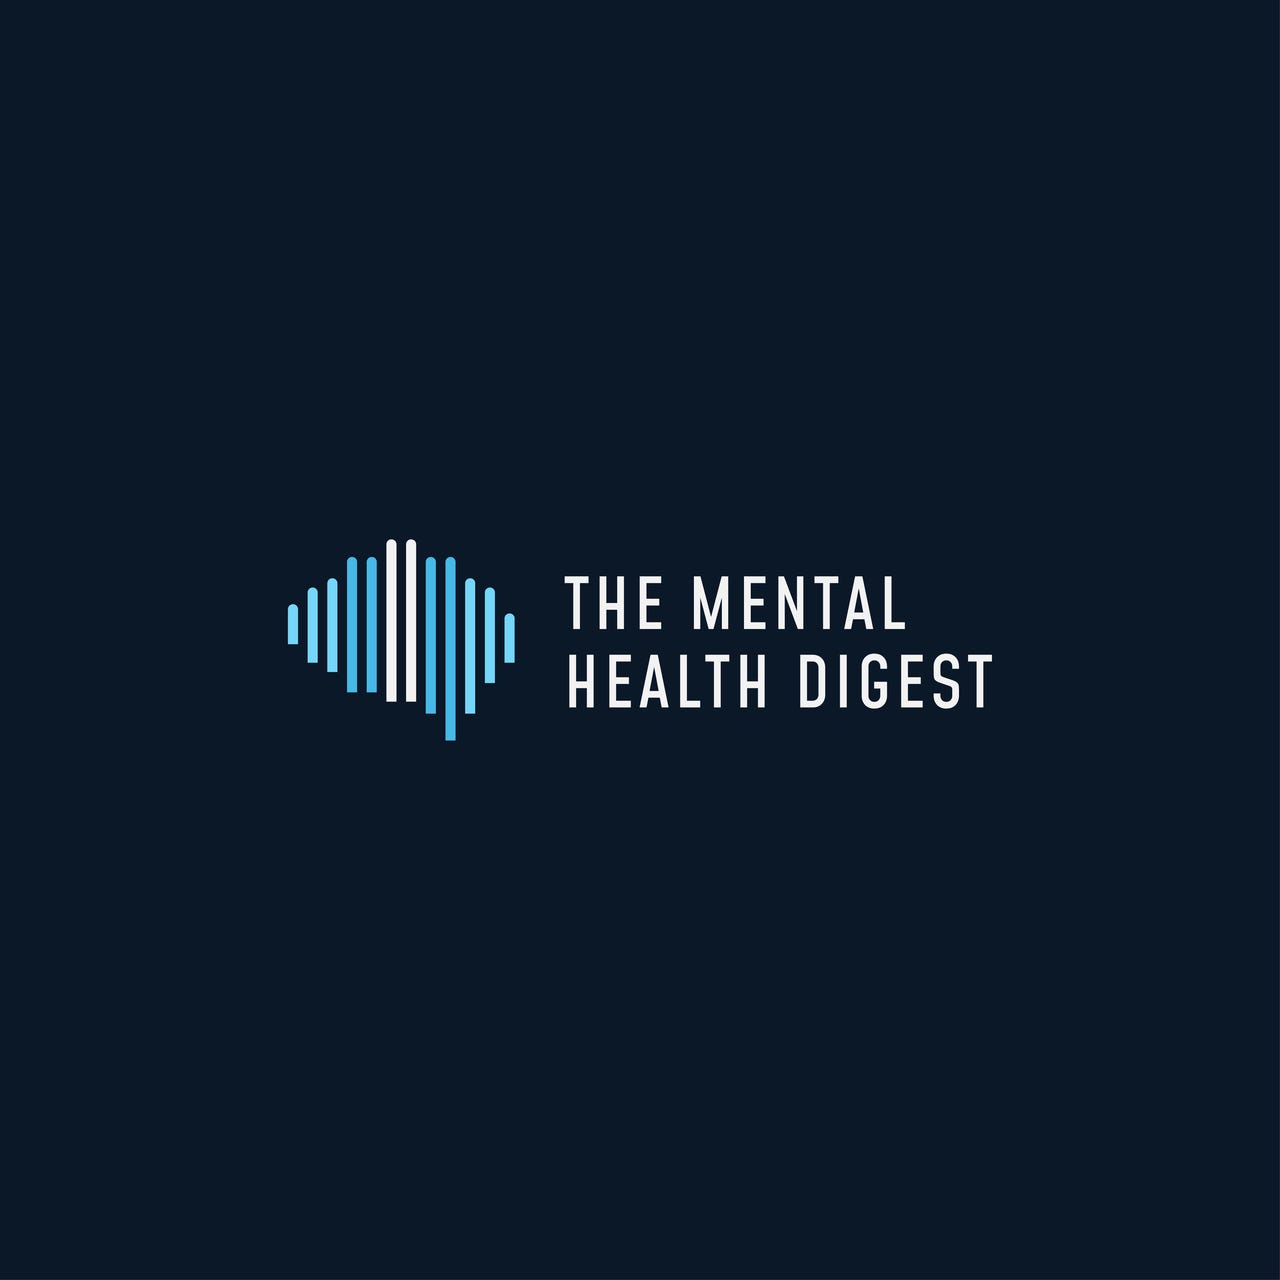 The Mental Health Digest